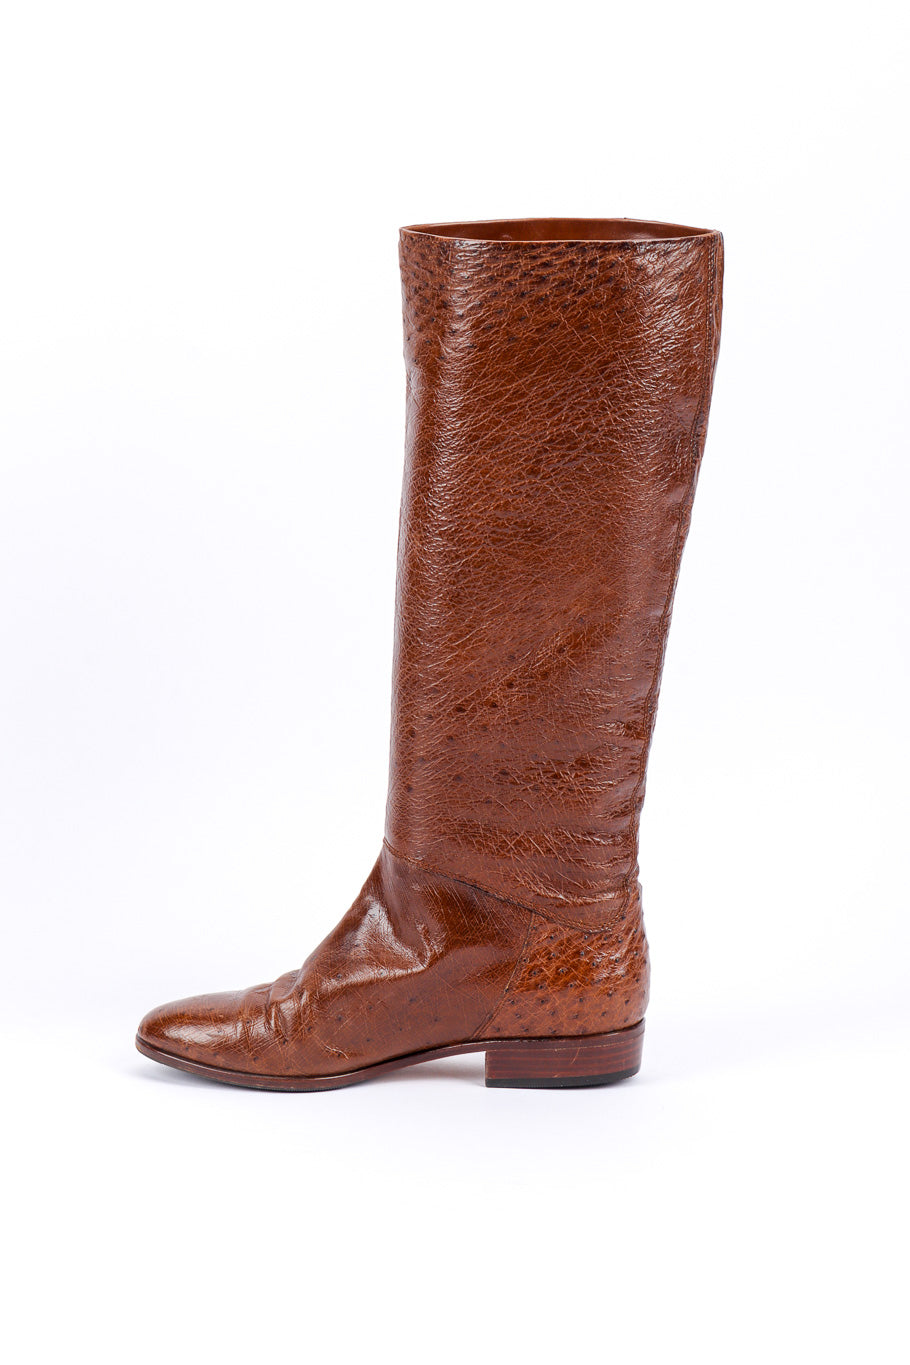 Vintage Gucci Brown Ostrich Leather Riding Boot right boot inner view @recessla